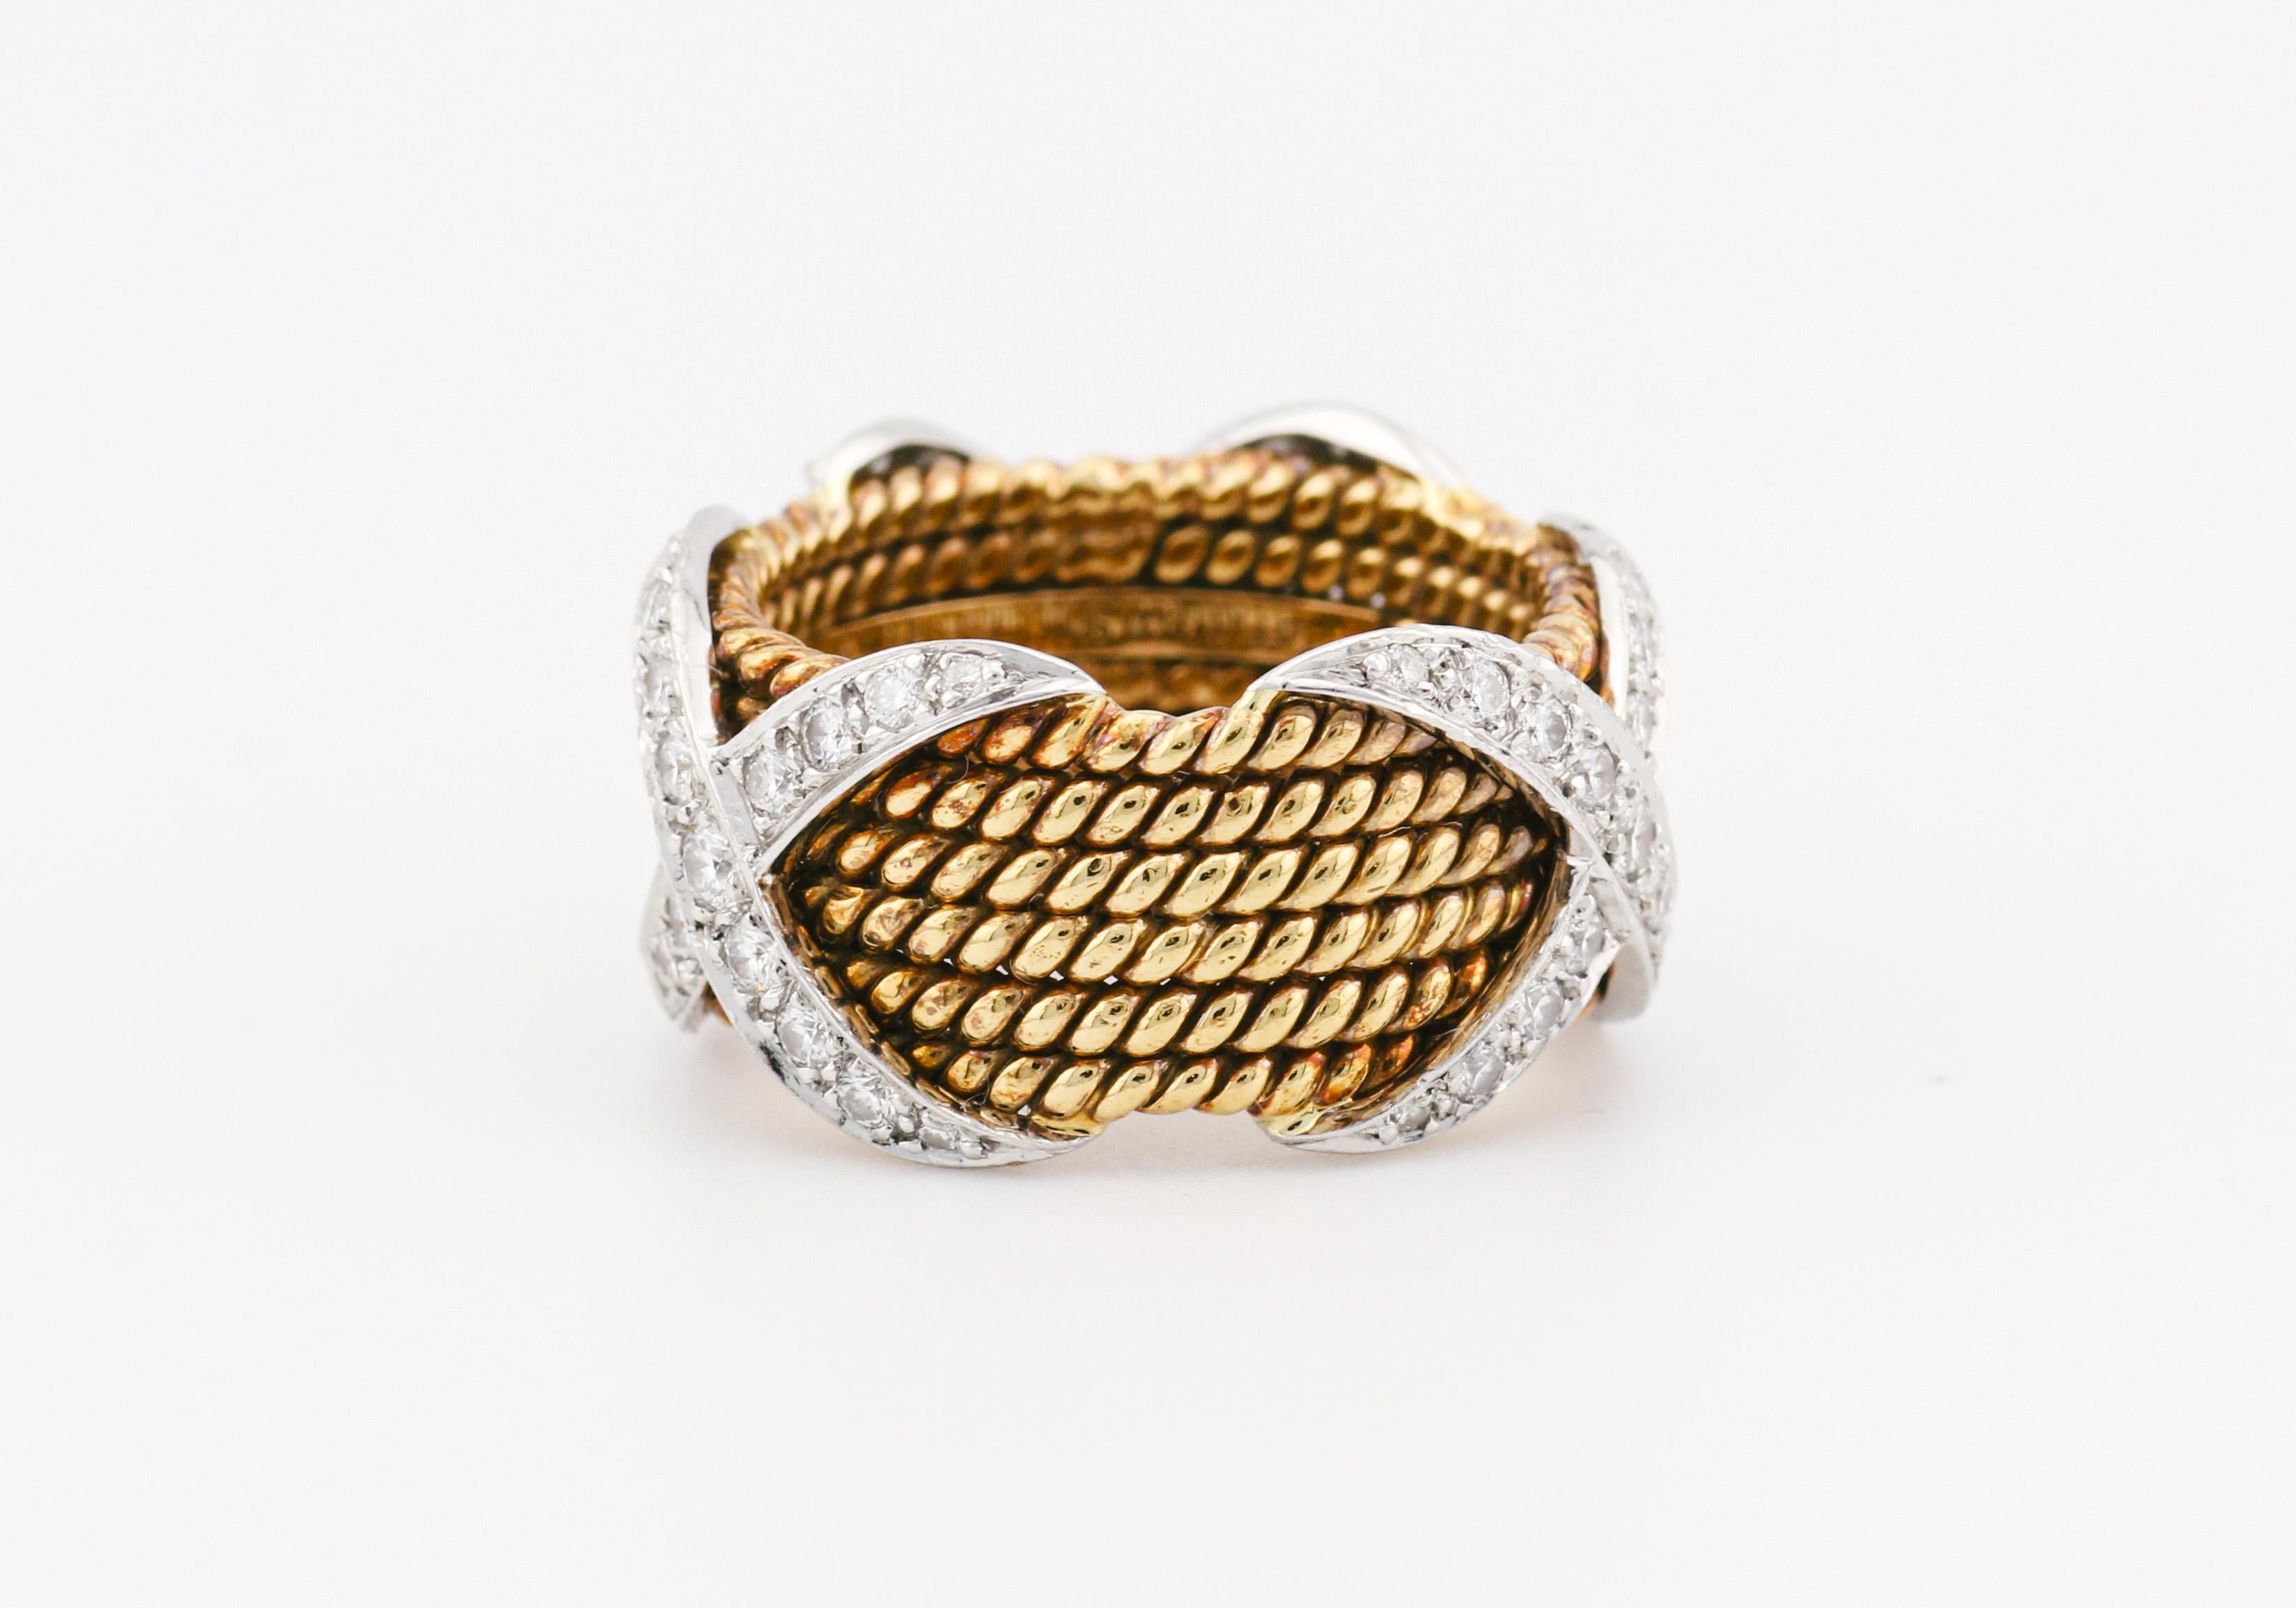 Introducing the Tiffany & Co. Schlumberger 18K Yellow Gold 6-Row Rope Design Ring with Platinum X's Adorned with Diamonds—a masterpiece that harmoniously blends classic artistry with modern elegance. Crafted by the legendary collaboration between